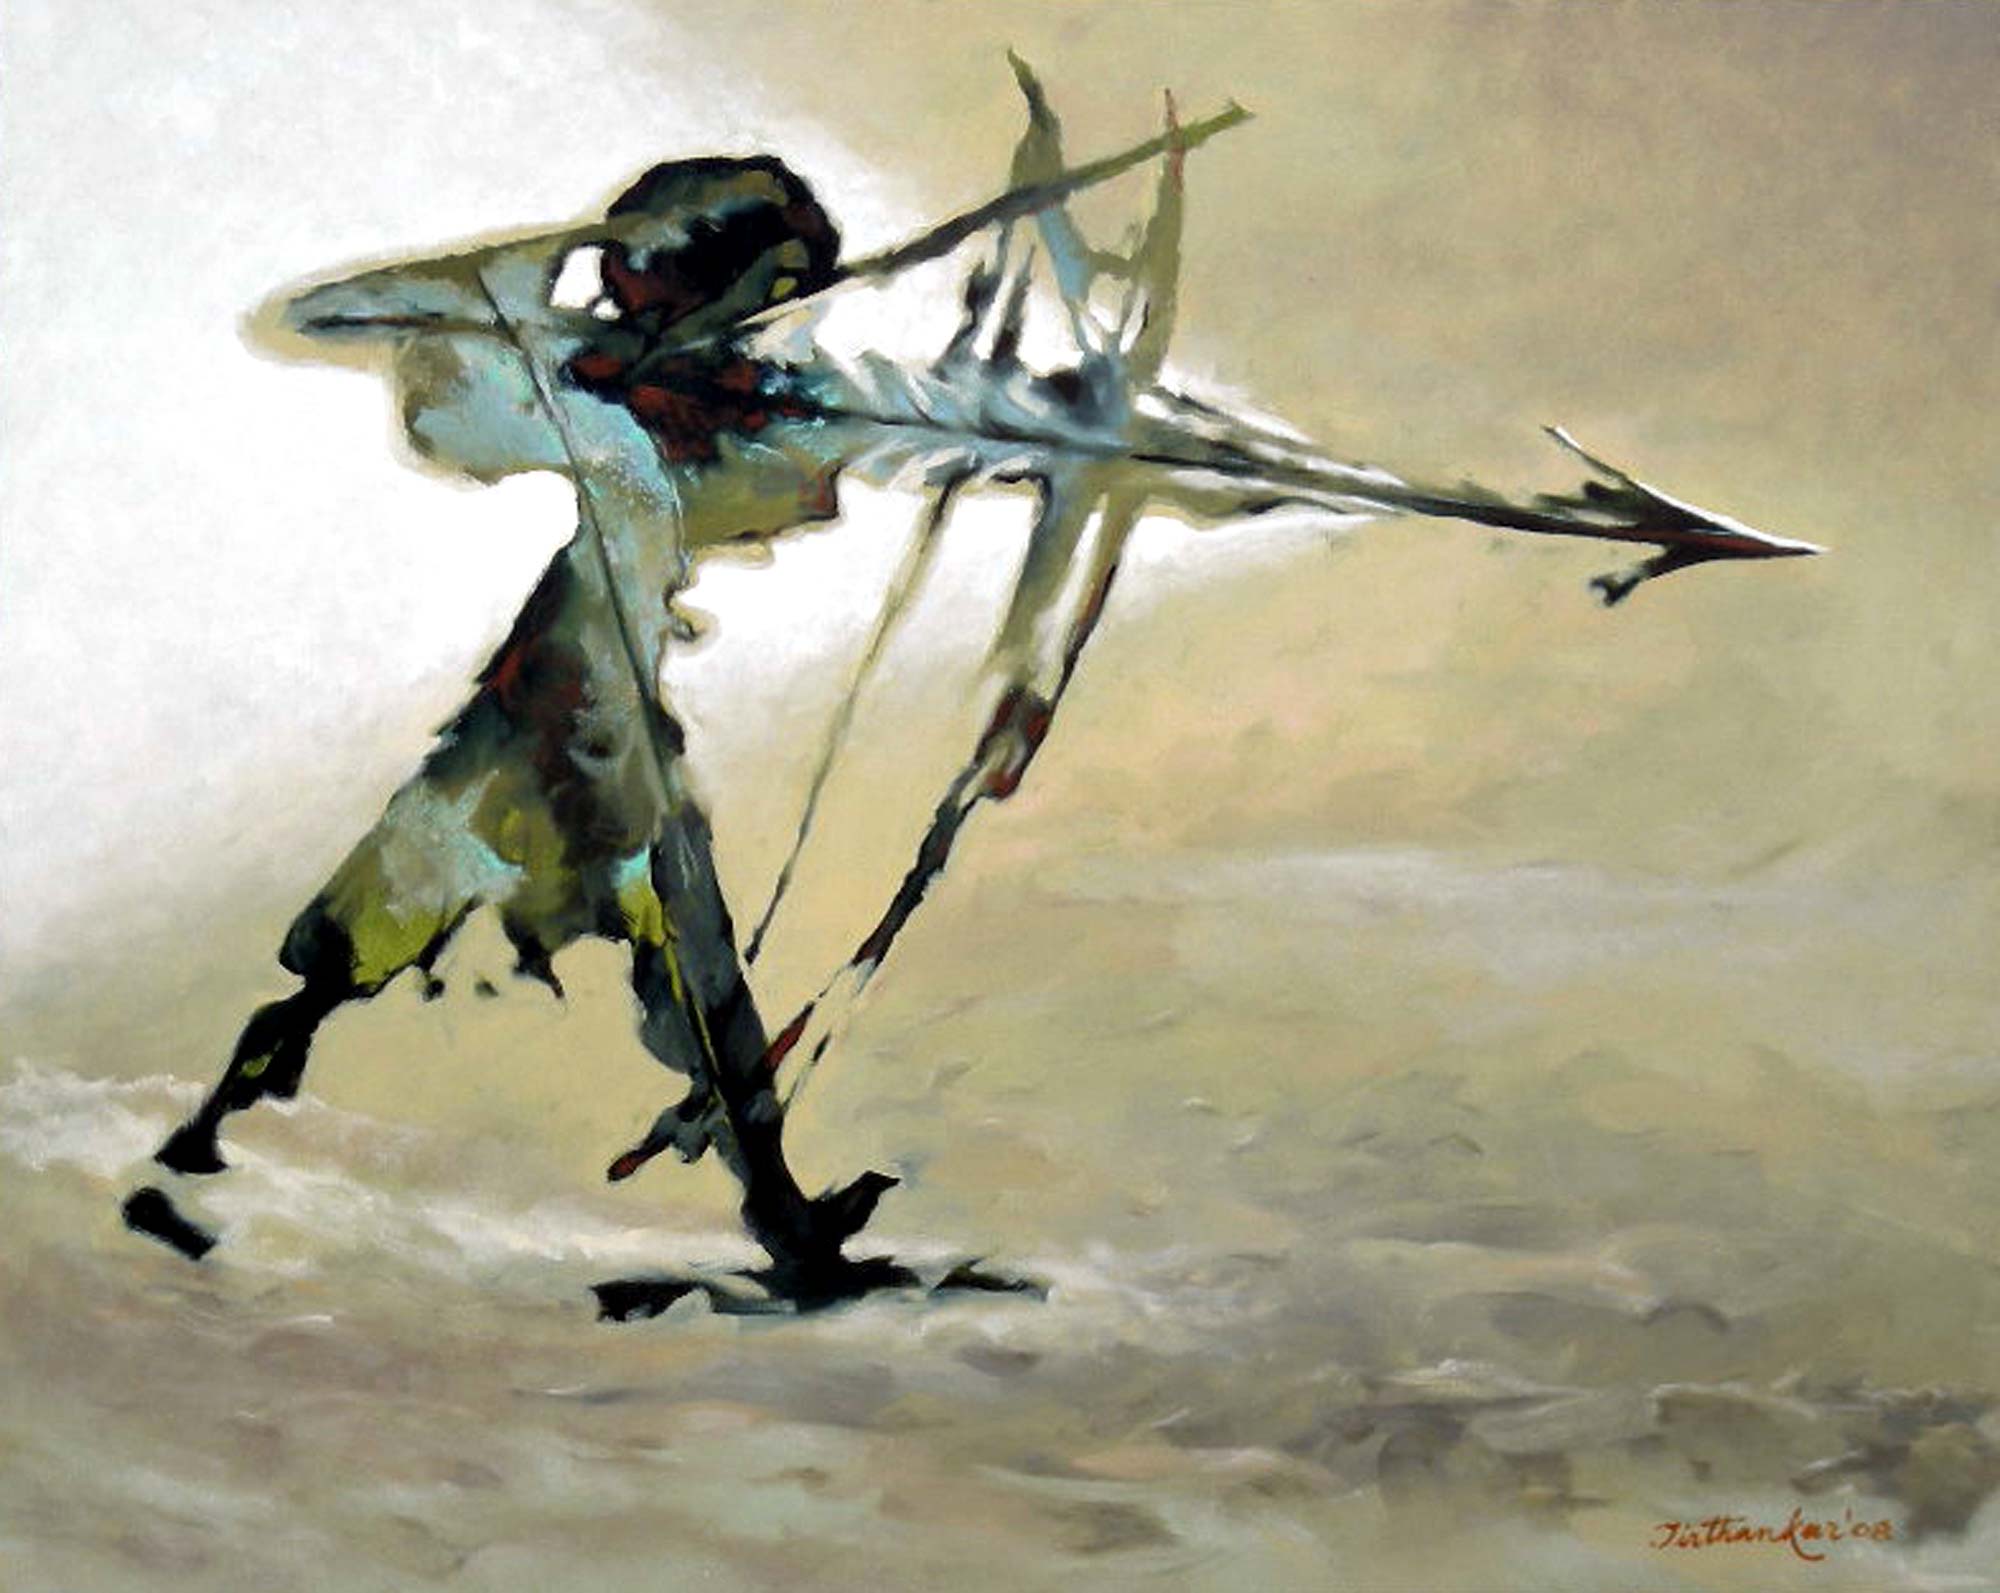 Semi Realistic Painting with Oil on Canvas "Hunter" art by Tirthankar Biswas